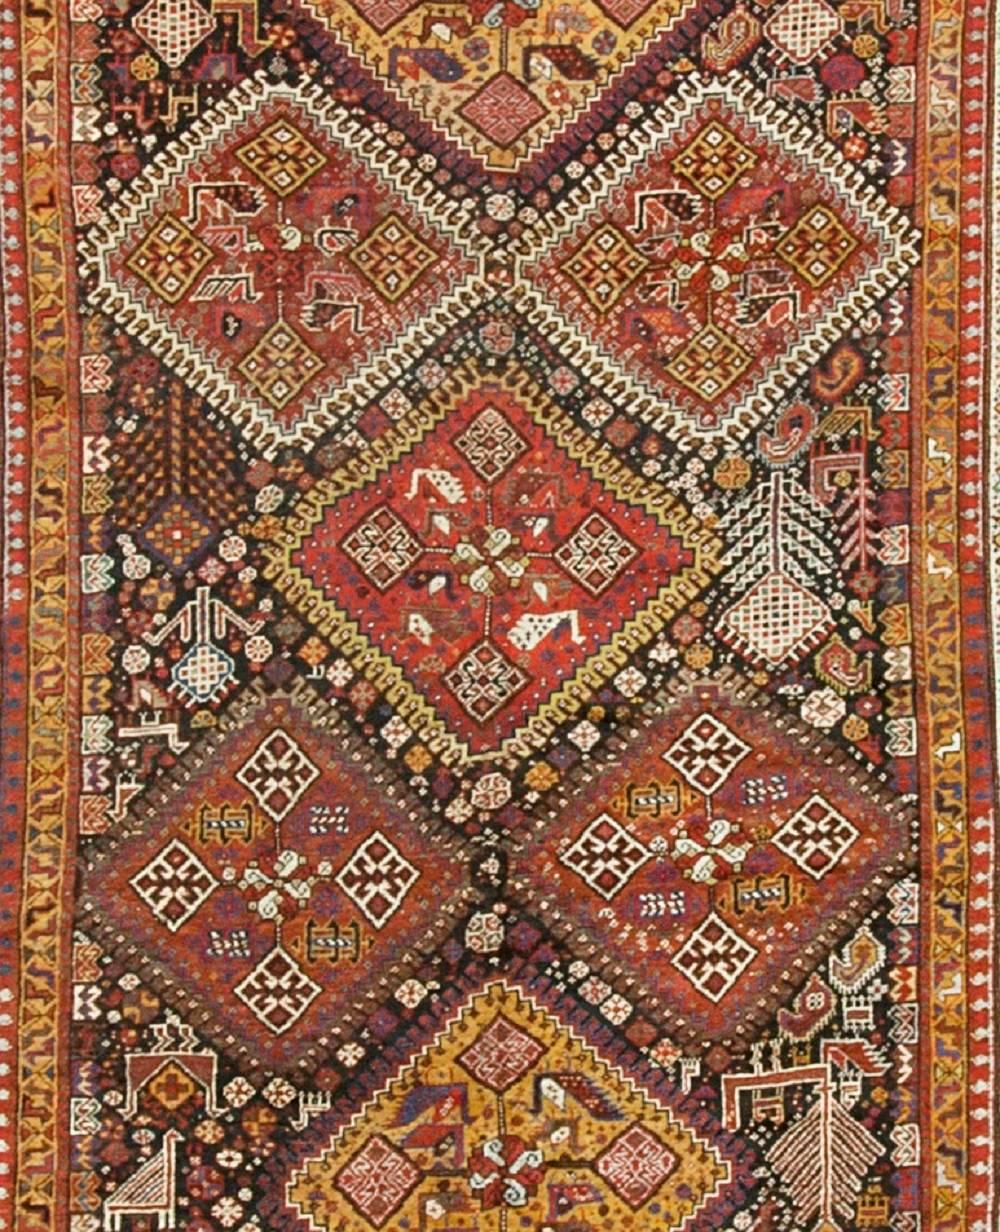 This vintage Qashqai is exceptional for a number of reason, the first being its size, hard to find especially in an antique or vintage piece. The beauty of the central field, filled with a vast selection of patterns and colors, is complimented so